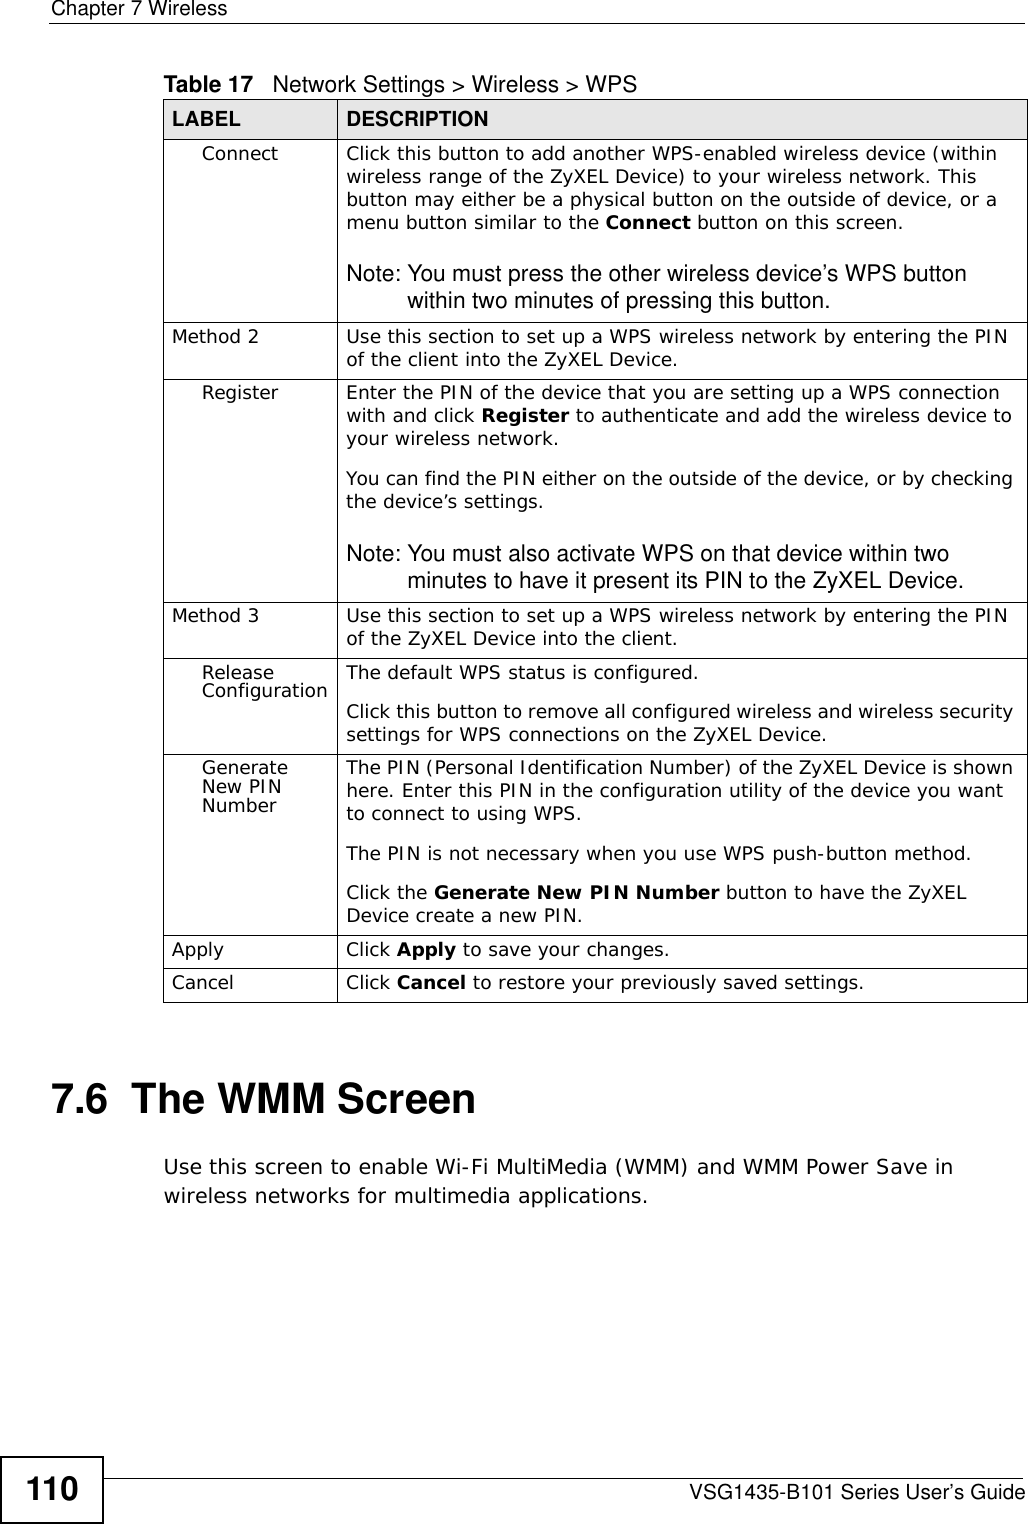 Chapter 7 WirelessVSG1435-B101 Series User’s Guide1107.6  The WMM ScreenUse this screen to enable Wi-Fi MultiMedia (WMM) and WMM Power Save in wireless networks for multimedia applications.Connect Click this button to add another WPS-enabled wireless device (within wireless range of the ZyXEL Device) to your wireless network. This button may either be a physical button on the outside of device, or a menu button similar to the Connect button on this screen.Note: You must press the other wireless device’s WPS button within two minutes of pressing this button.Method 2 Use this section to set up a WPS wireless network by entering the PIN of the client into the ZyXEL Device.Register Enter the PIN of the device that you are setting up a WPS connection with and click Register to authenticate and add the wireless device to your wireless network.You can find the PIN either on the outside of the device, or by checking the device’s settings.Note: You must also activate WPS on that device within two minutes to have it present its PIN to the ZyXEL Device.Method 3 Use this section to set up a WPS wireless network by entering the PIN of the ZyXEL Device into the client.Release Configuration The default WPS status is configured.Click this button to remove all configured wireless and wireless security settings for WPS connections on the ZyXEL Device.Generate New PIN NumberThe PIN (Personal Identification Number) of the ZyXEL Device is shown here. Enter this PIN in the configuration utility of the device you want to connect to using WPS.The PIN is not necessary when you use WPS push-button method.Click the Generate New PIN Number button to have the ZyXEL Device create a new PIN. Apply Click Apply to save your changes.Cancel Click Cancel to restore your previously saved settings.Table 17   Network Settings &gt; Wireless &gt; WPSLABEL DESCRIPTION